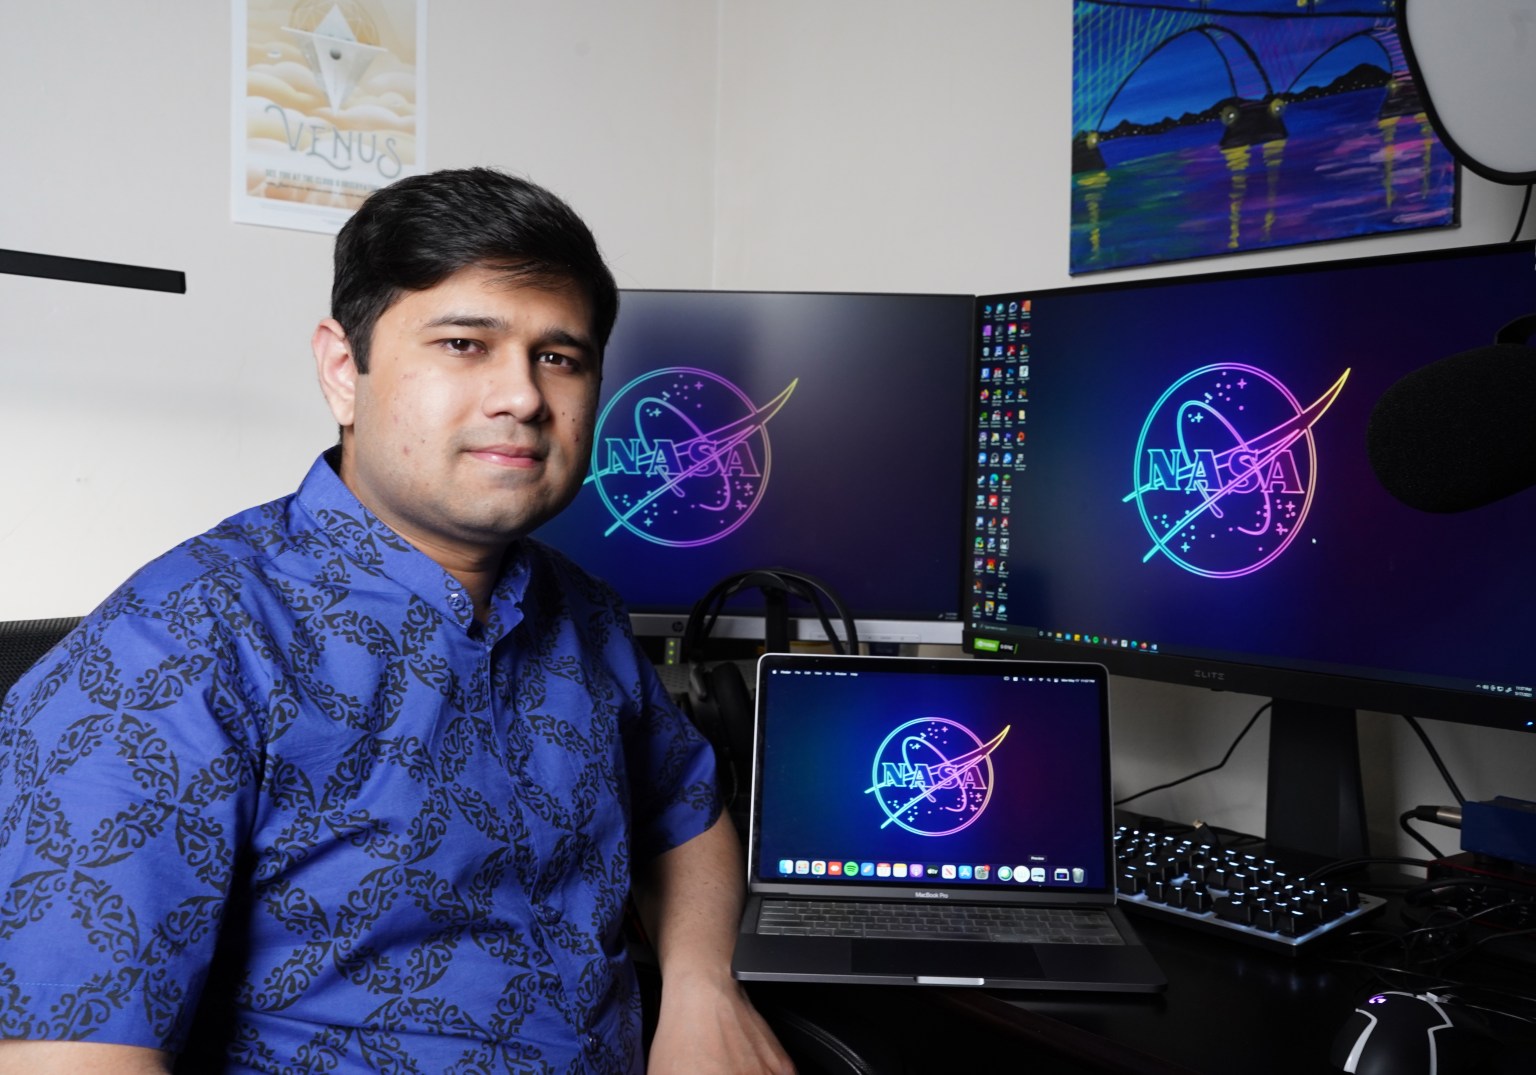 “There is certainly a feeling of responsibility to carry on and add more to what those before me had started,” said NASA intern Ahsan Khan.